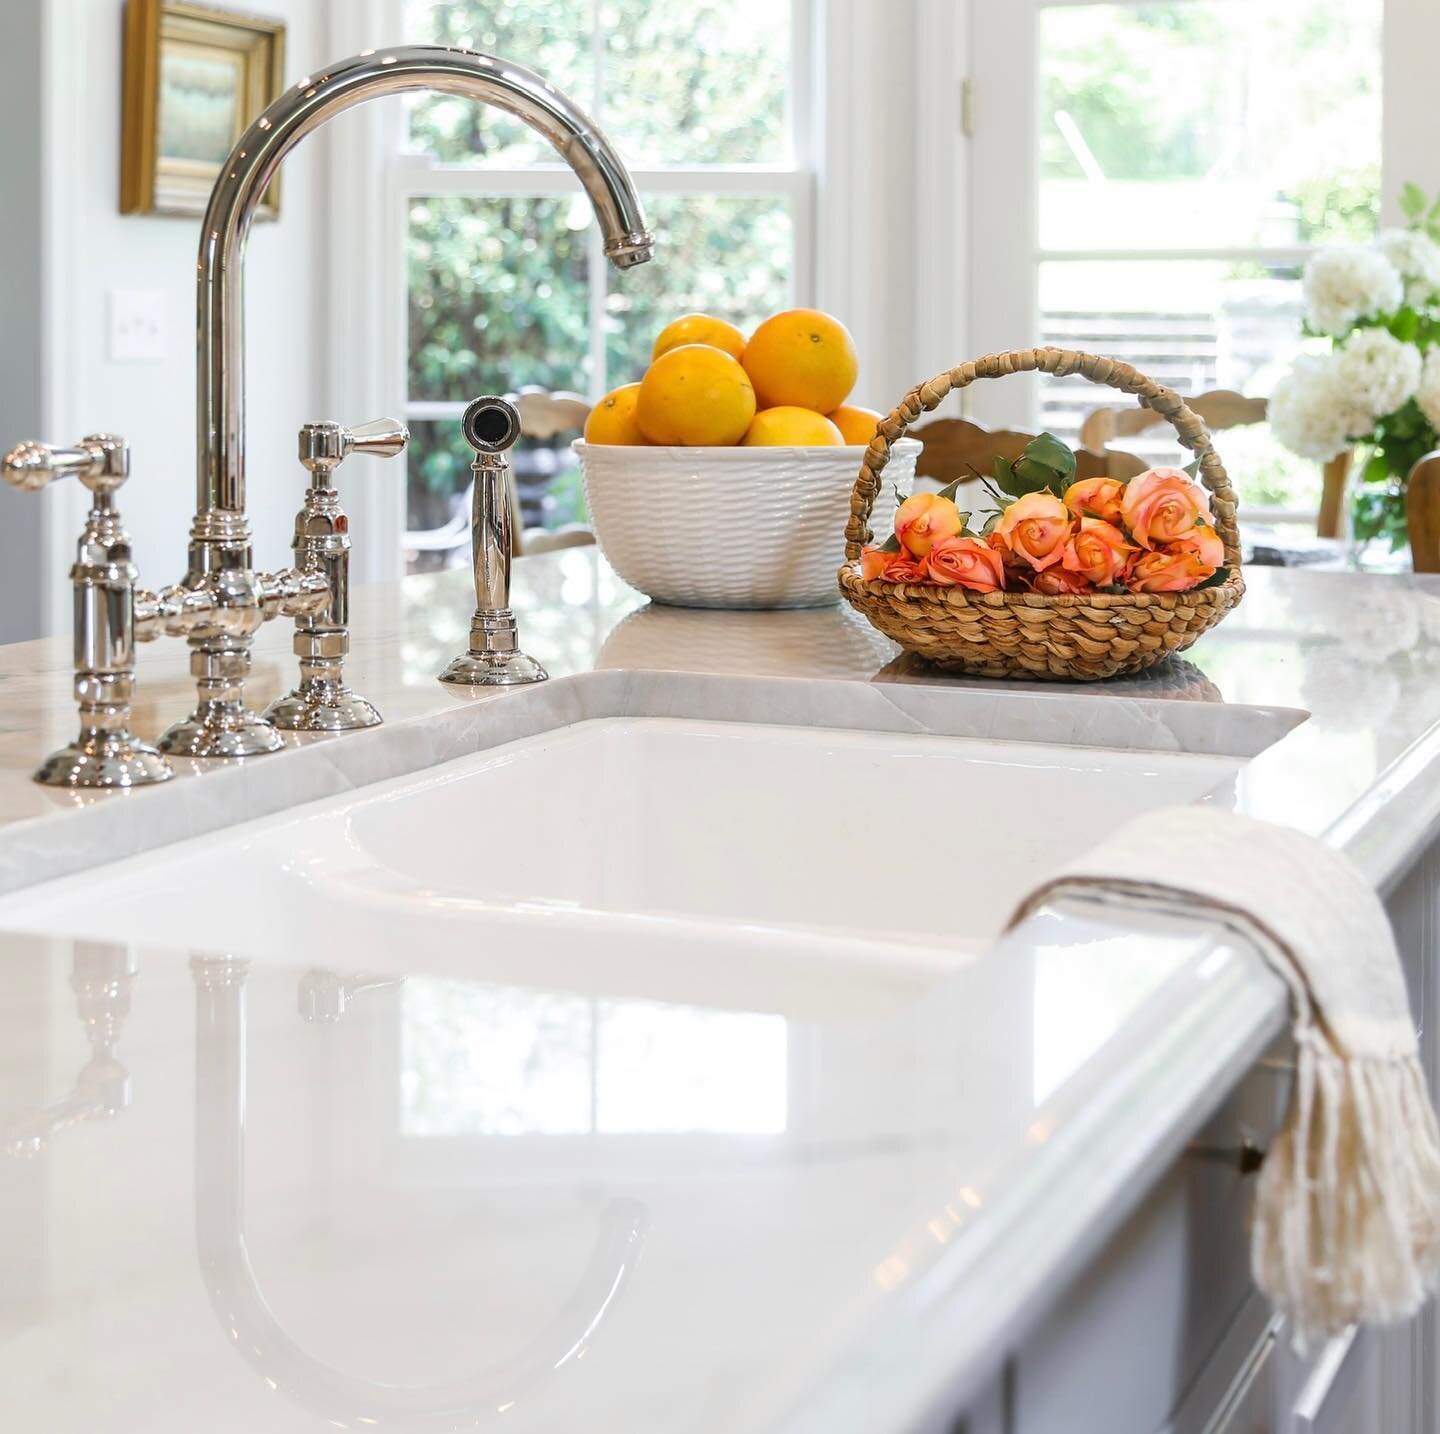 The four most important words in any marriage, &quot;I'll do the dishes.&quot; Anonymous. In a kitchen this pretty, I wouldn&rsquo;t mind the chore. Interior Design by @donnagilliaminteriors.

The secret sauce to our 23 years of marital bliss is that